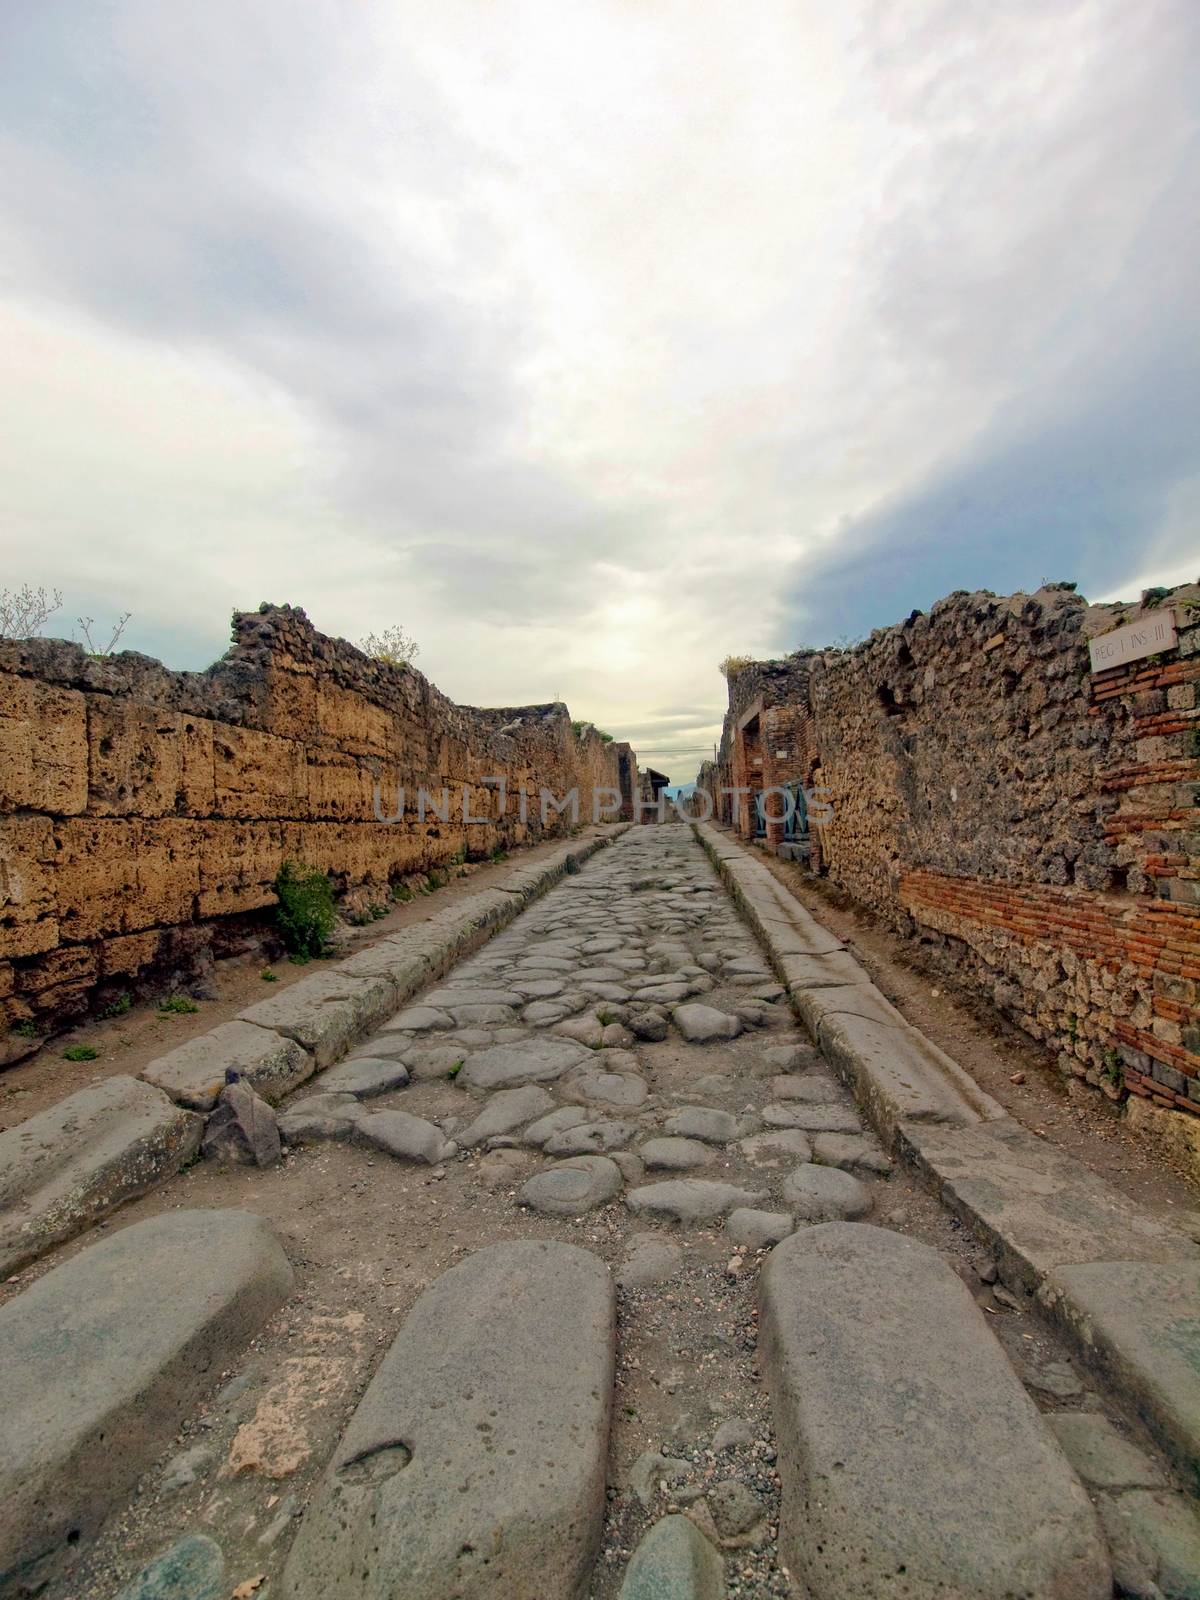 Street in Pompeii with a stone walkway for pedestrians, in Italy